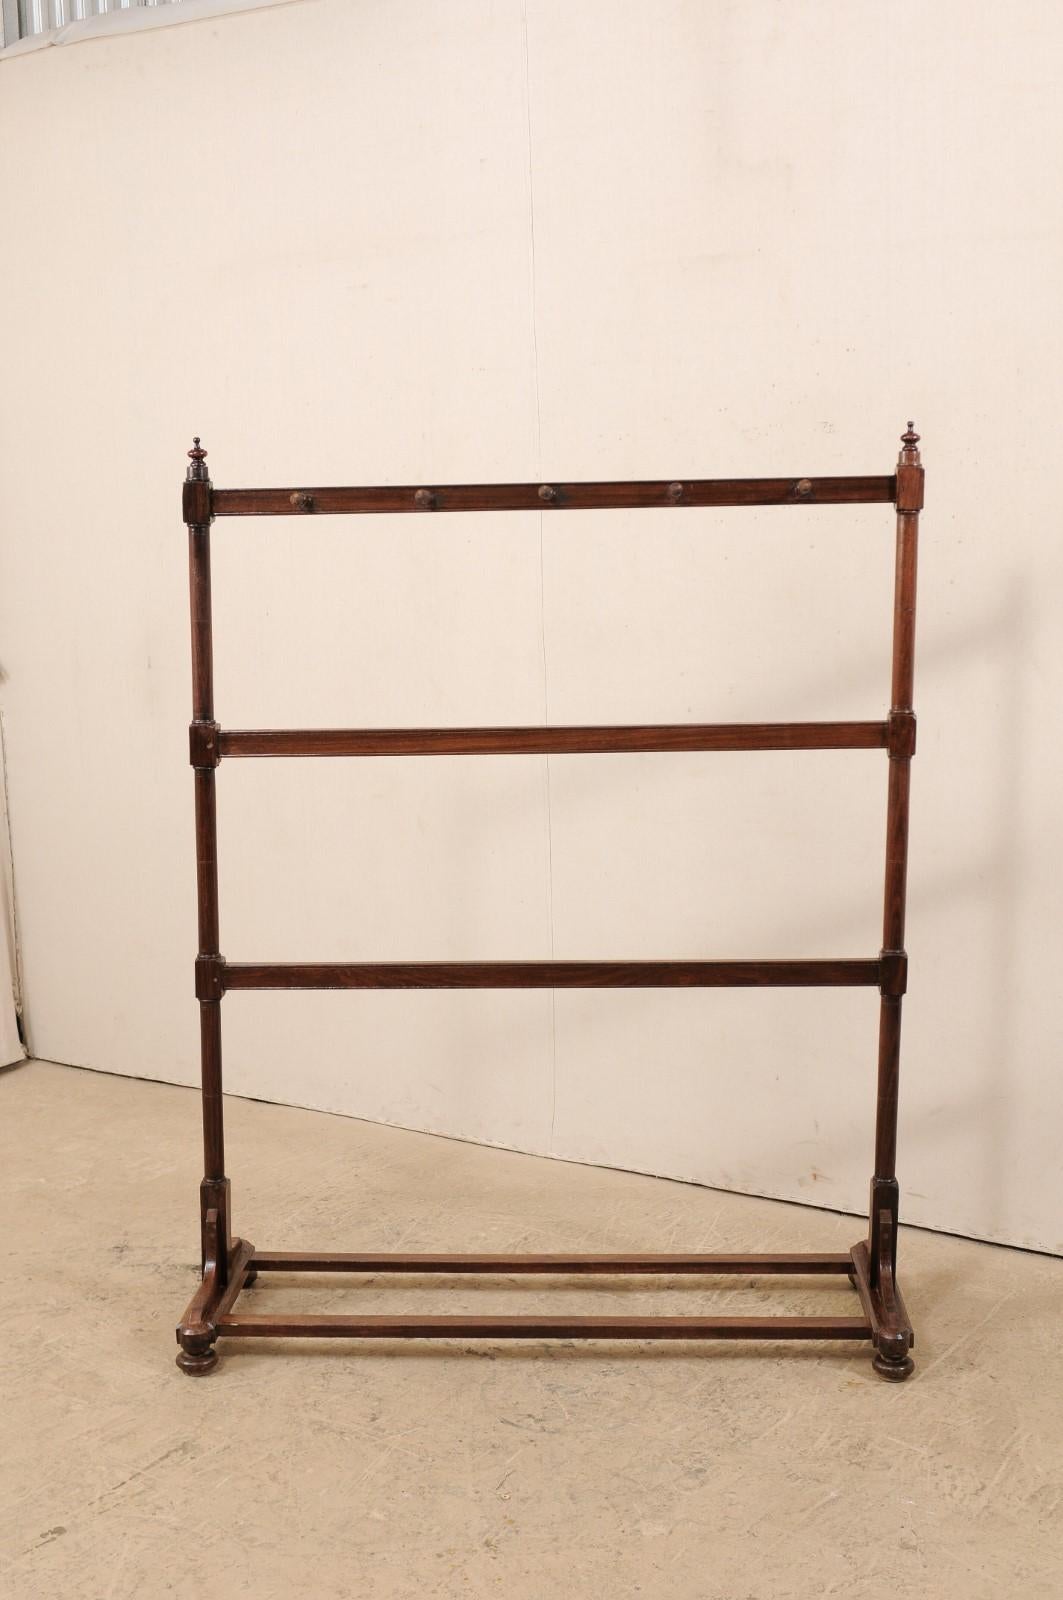 A vintage freestanding wooden rack. This coat hanging rack features five pegs place in horizontal fashion along the top, perfect for scarves and hats, atop two center rack/support posts beneath. The racks are flanked with round, slender posts, each